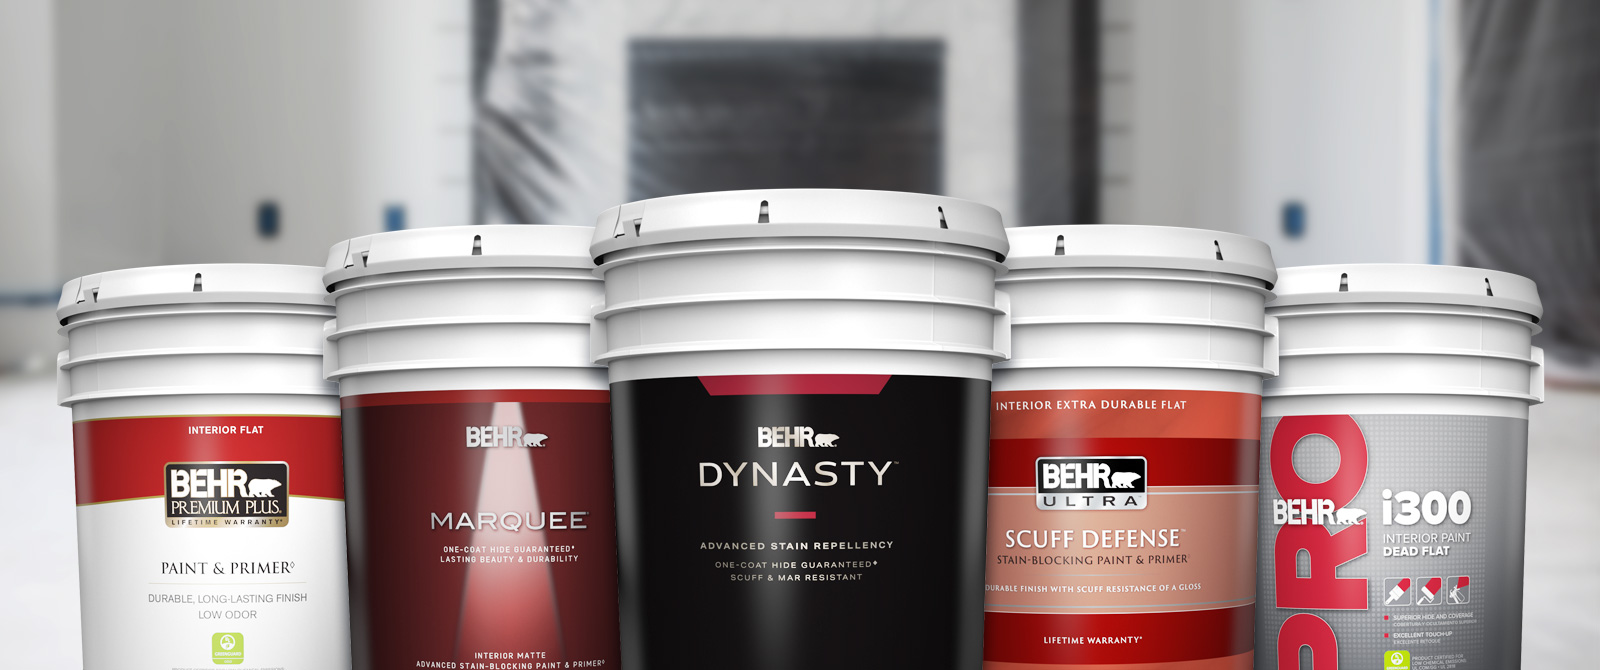 BEHR Interior Product line of Products